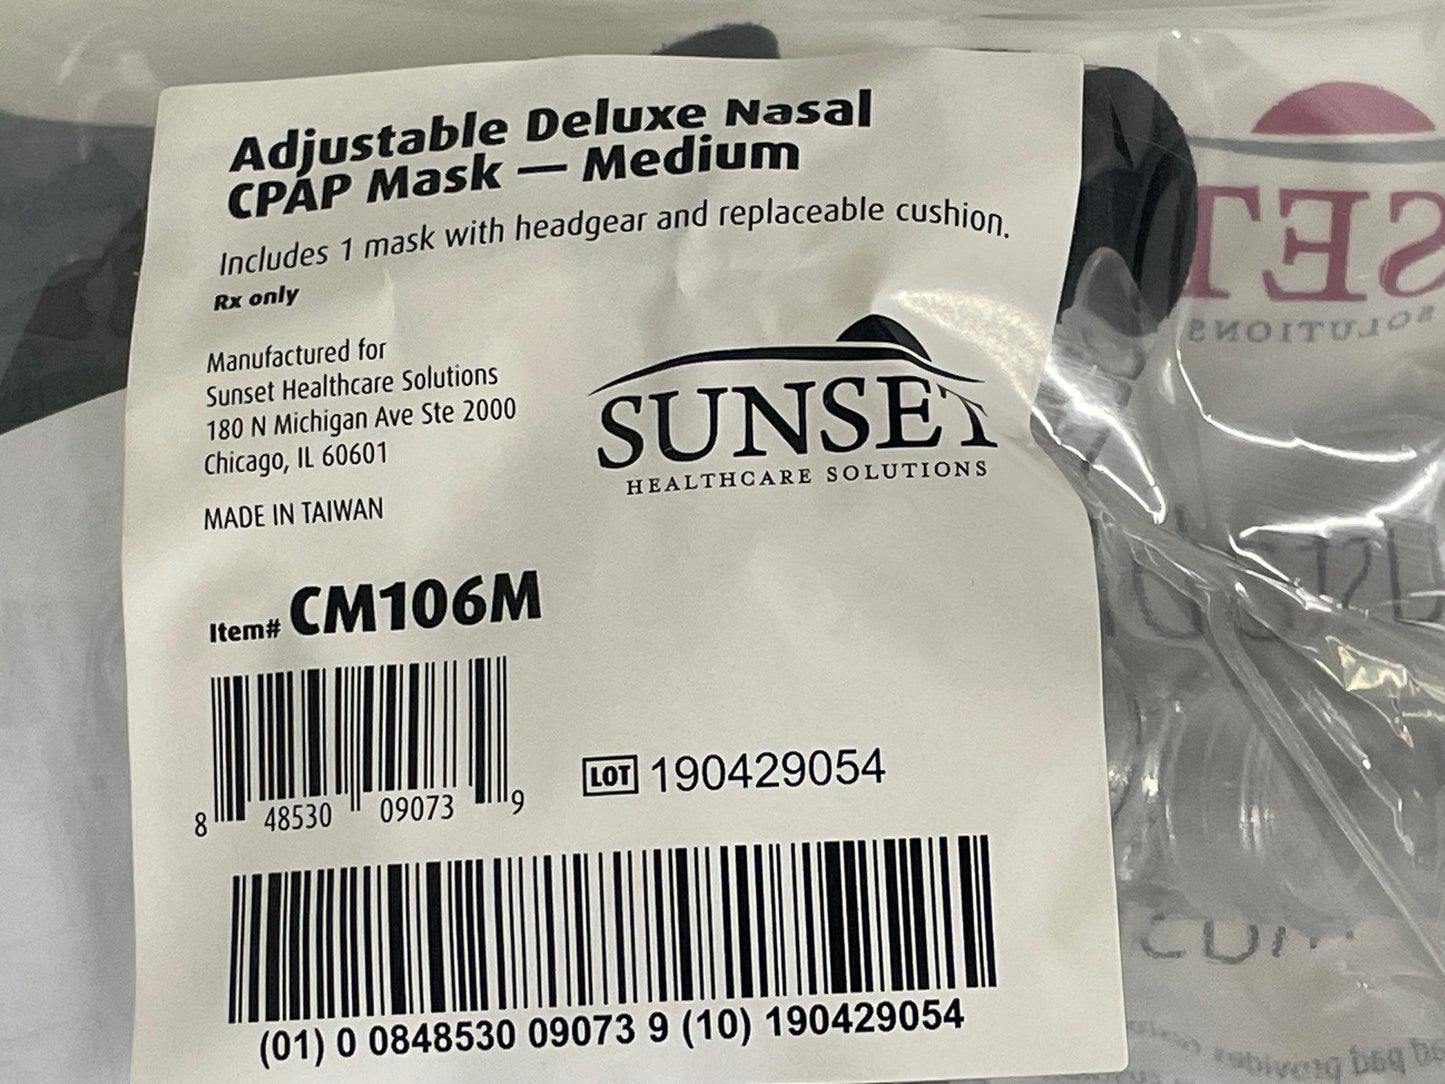 NEW Medium Sunset Healthcare Adjustable Deluxe Nasal CPAP Mask with Headgear CM106M - MBR Medicals